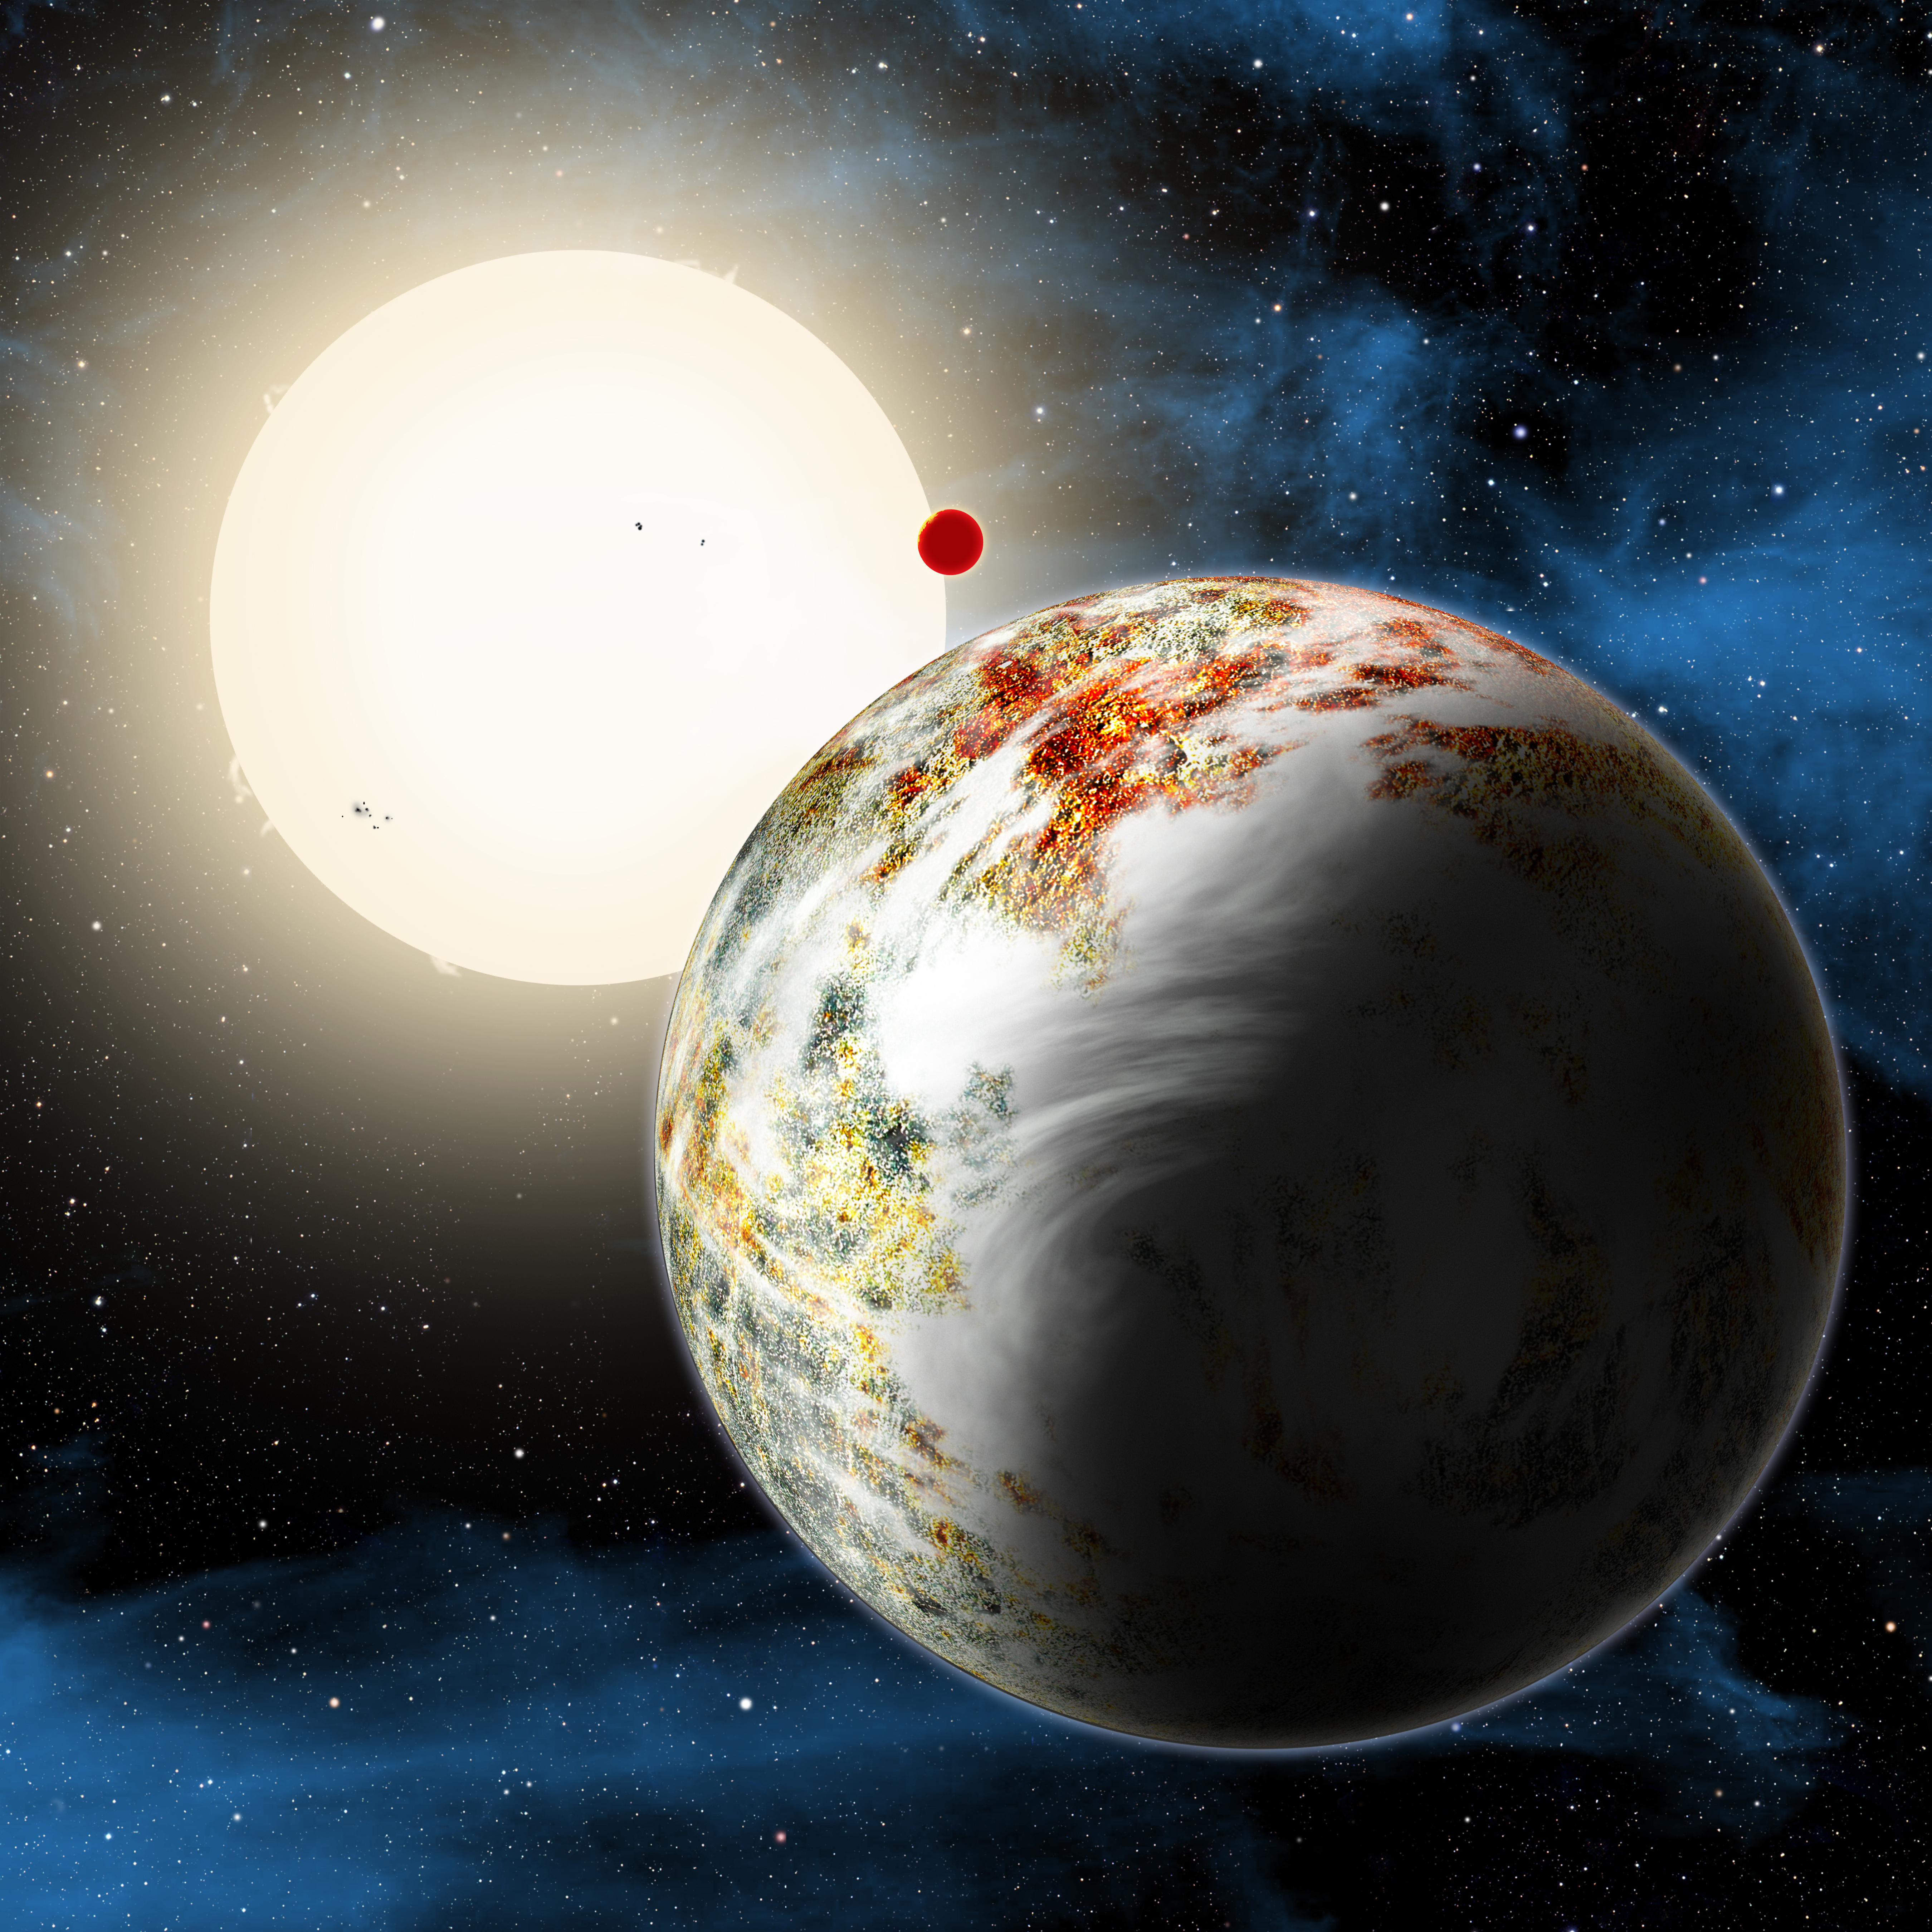 An artist concept shows the Kepler-10 system, home to two rocky planets. In the foreground is Kepler-10c, a planet that weighs 17 times as much as Earth and is more than twice as large in size. Image: NASA